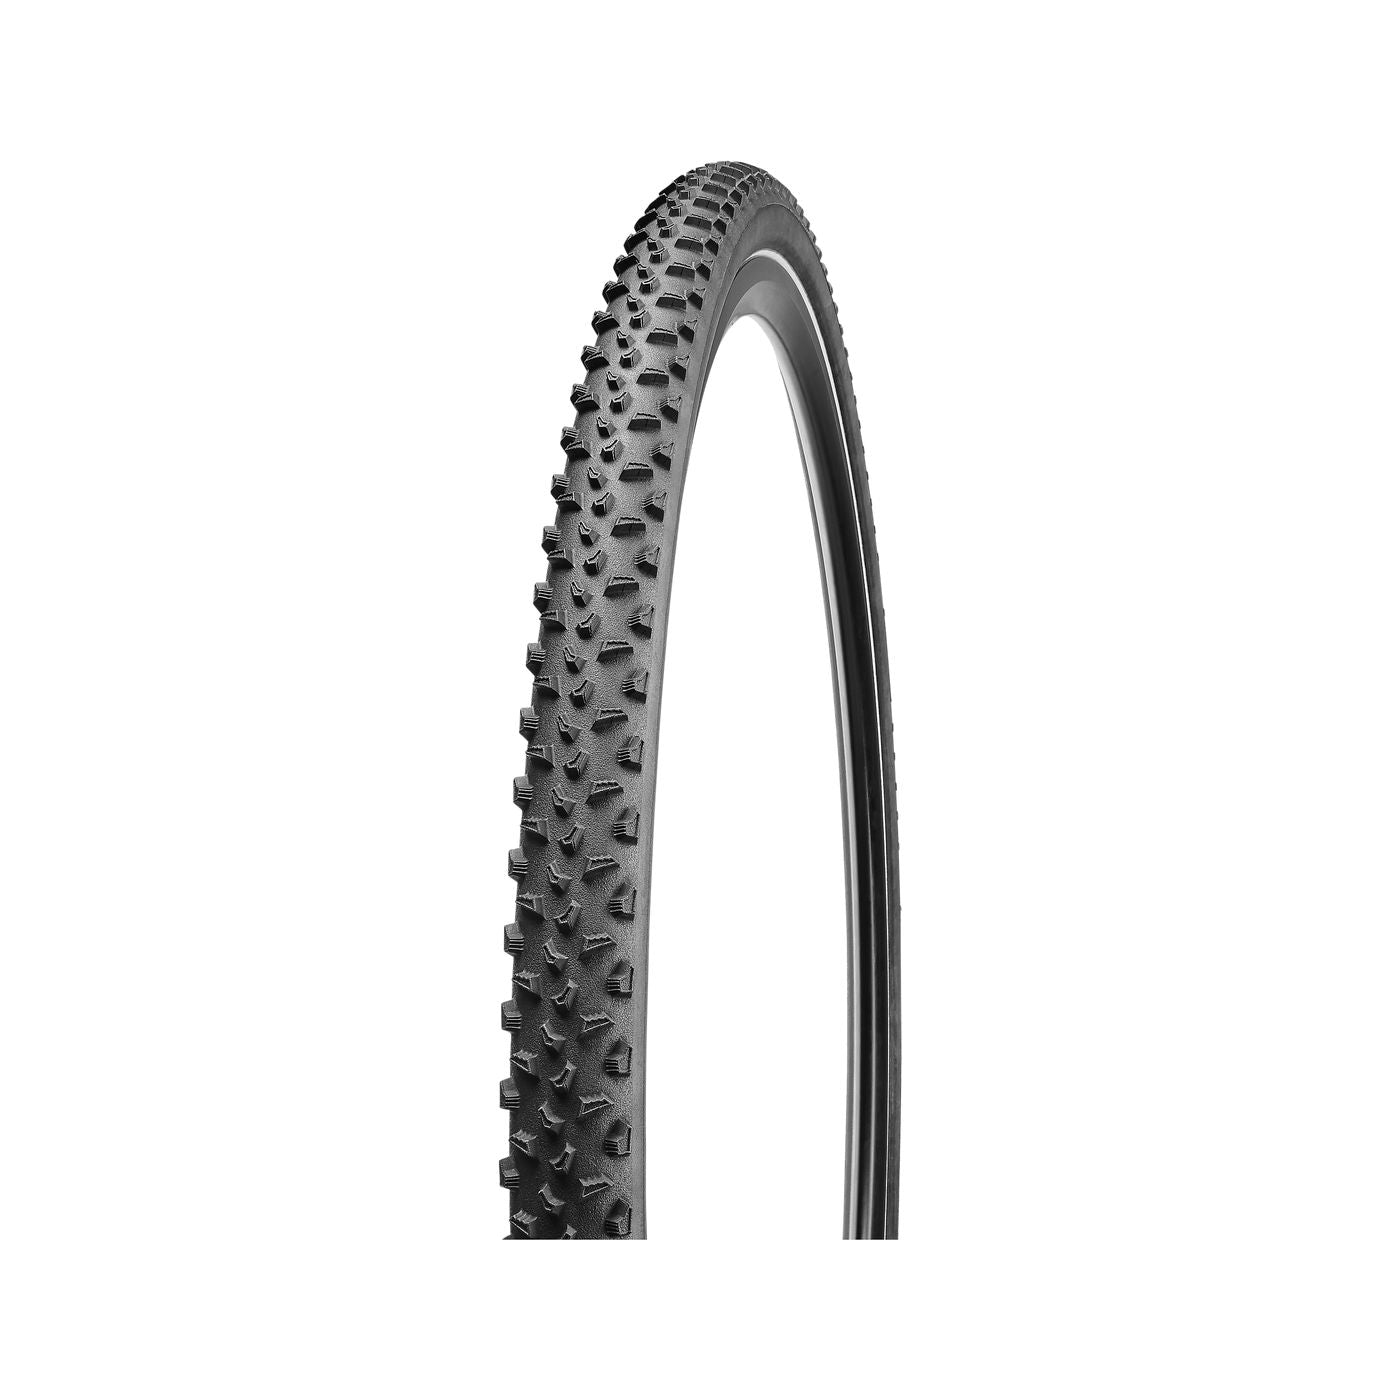 Specialized Terra Pro 2Bliss Ready 700c Road Bike Tire - Tires - Bicycle Warehouse